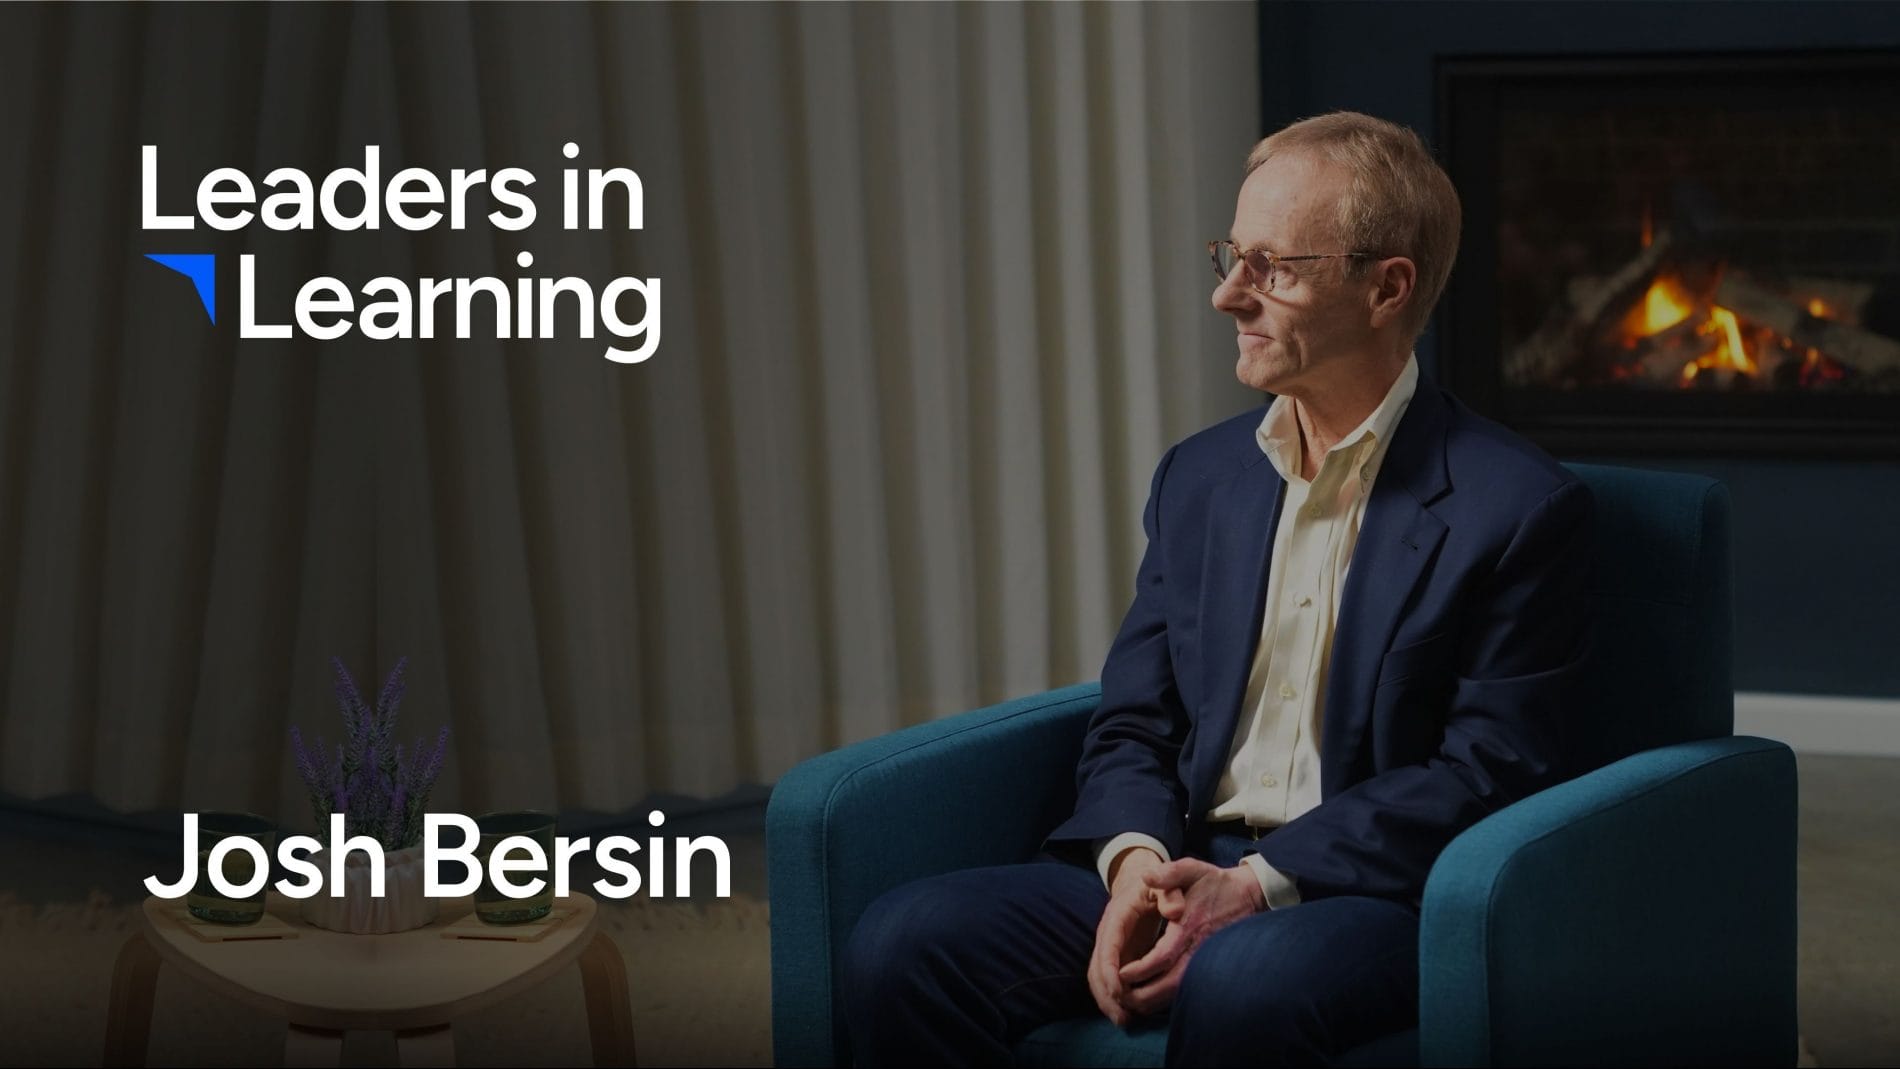 Episode 1: Josh Bersin explores the business of learning